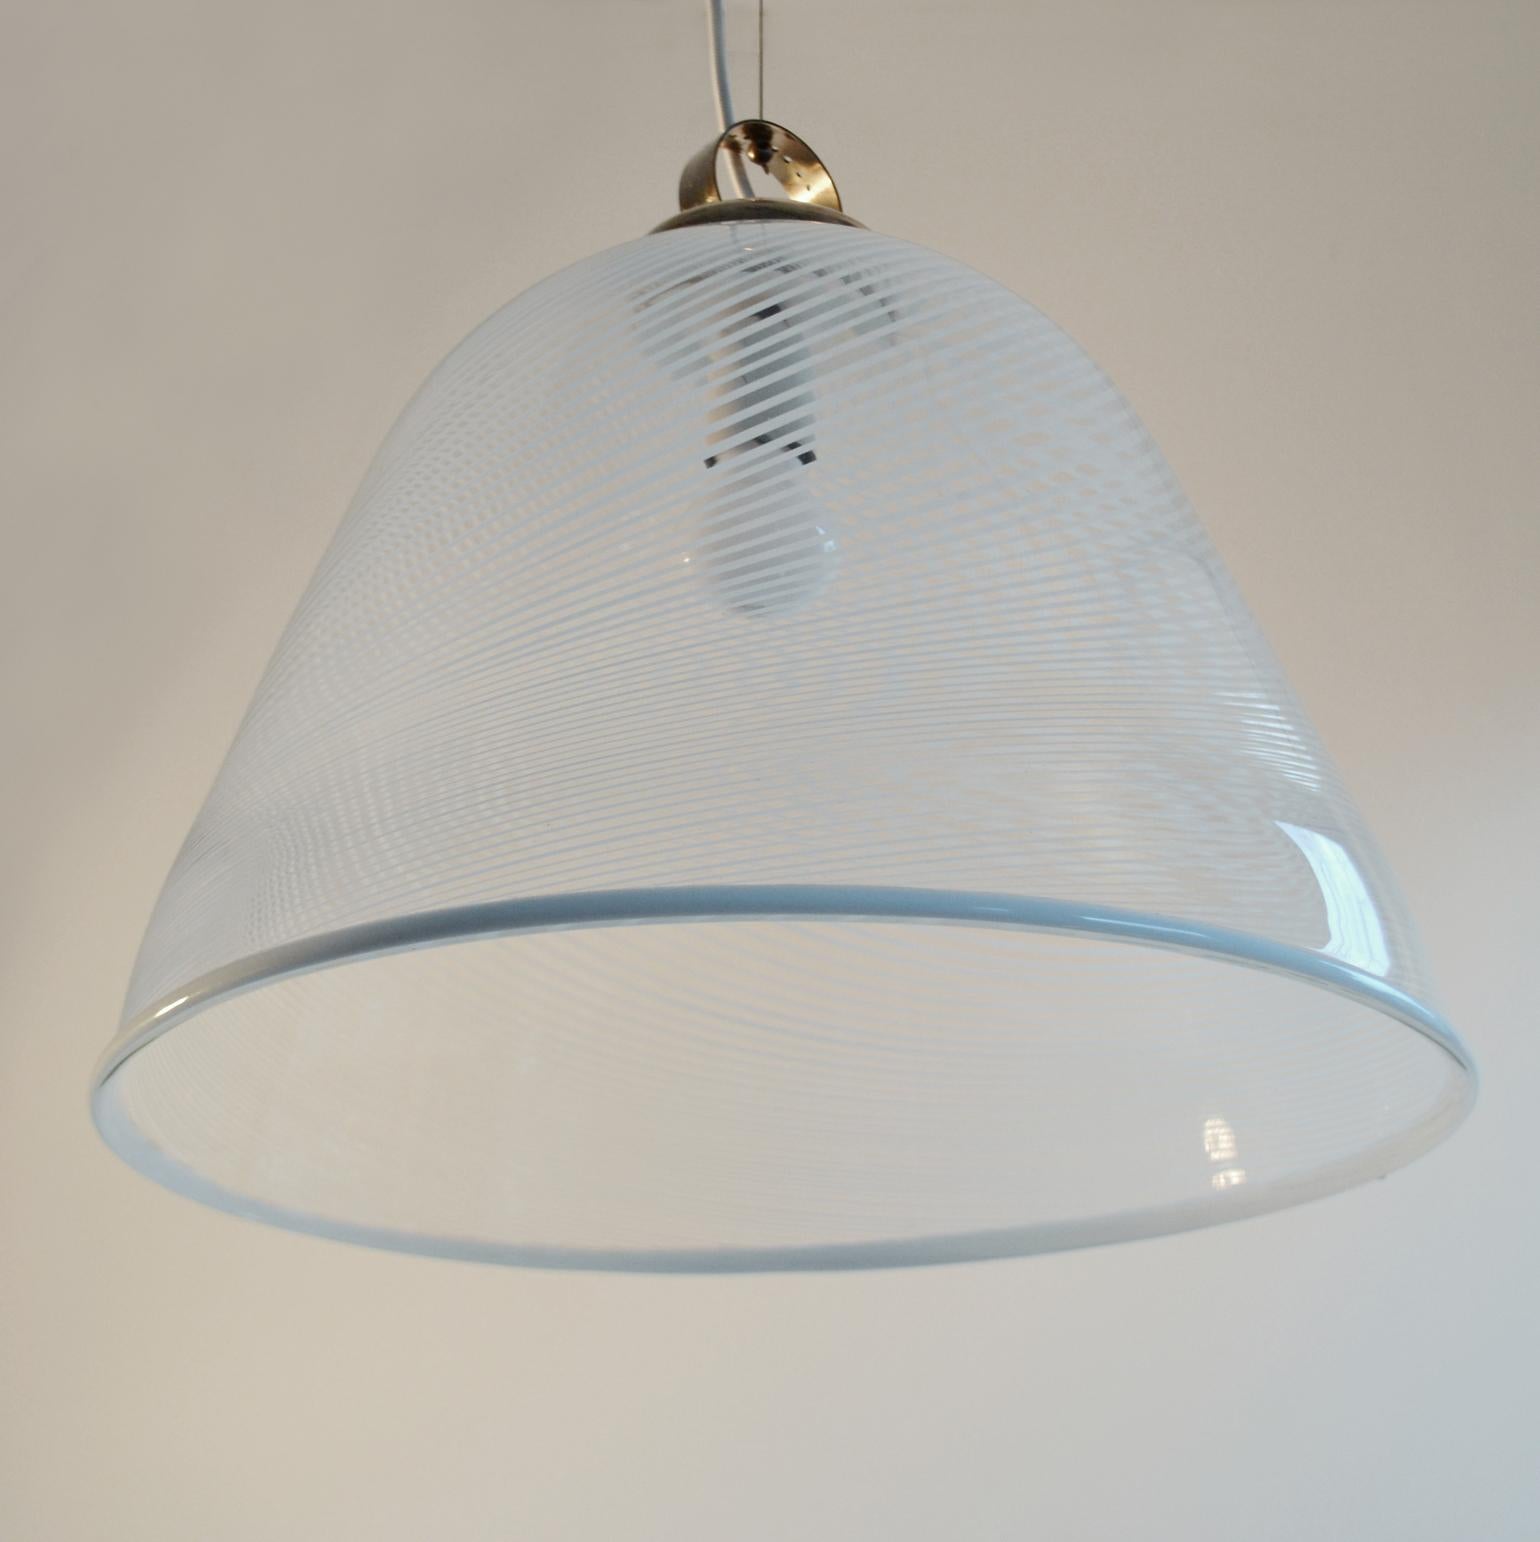 Large and exquisite blown crystal clear Murano glass dome shape lampshade decorated with spiraling white stripes of using the highly skilled Reticello technique that involves the merging of two glass cane domes (one inside the other) in which the